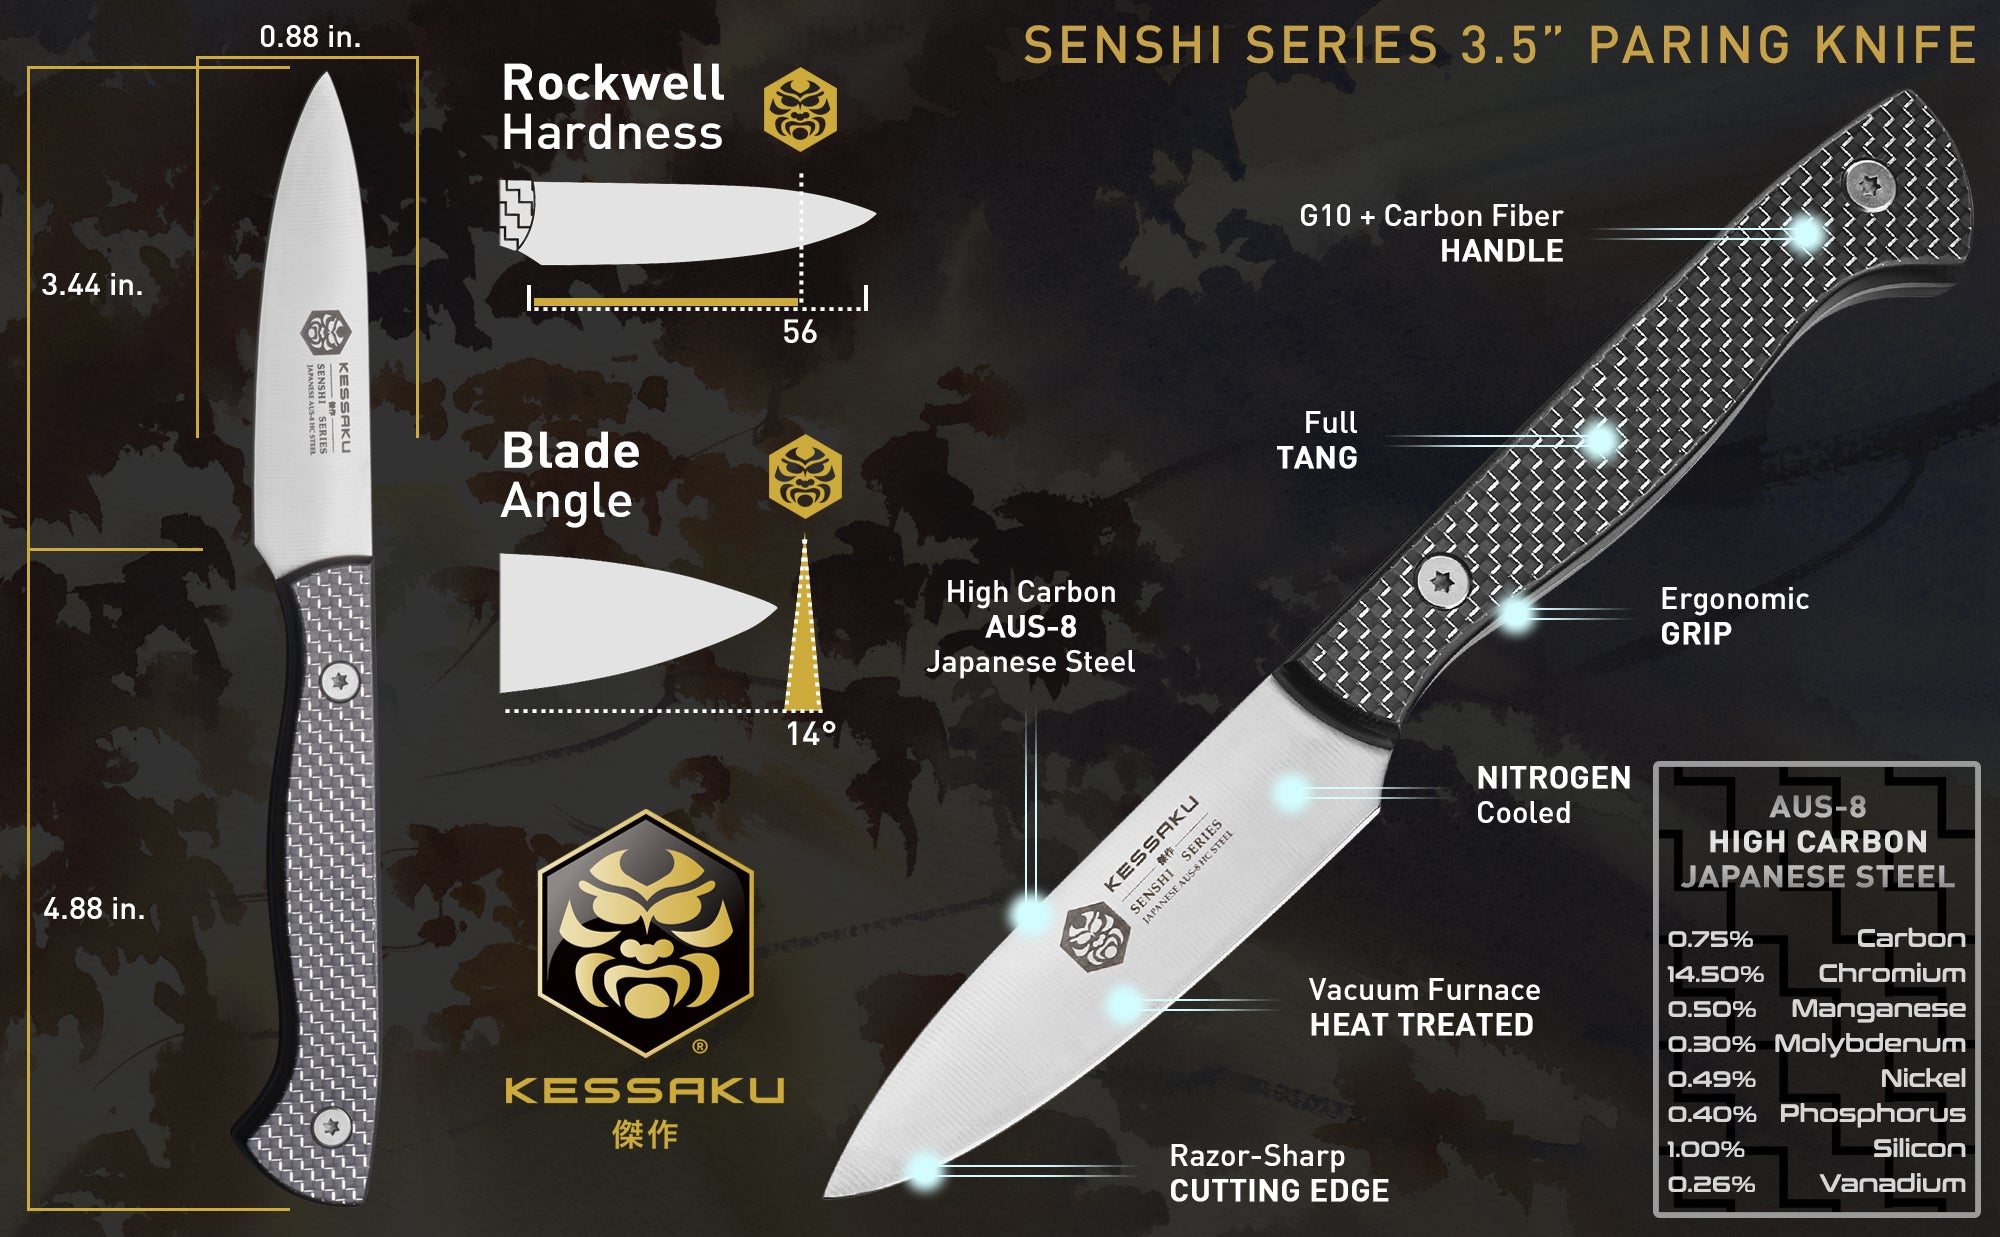 The Kessaku Senshi Series 3.5-Inch Paring Knife's features, dimensions, and steel composition